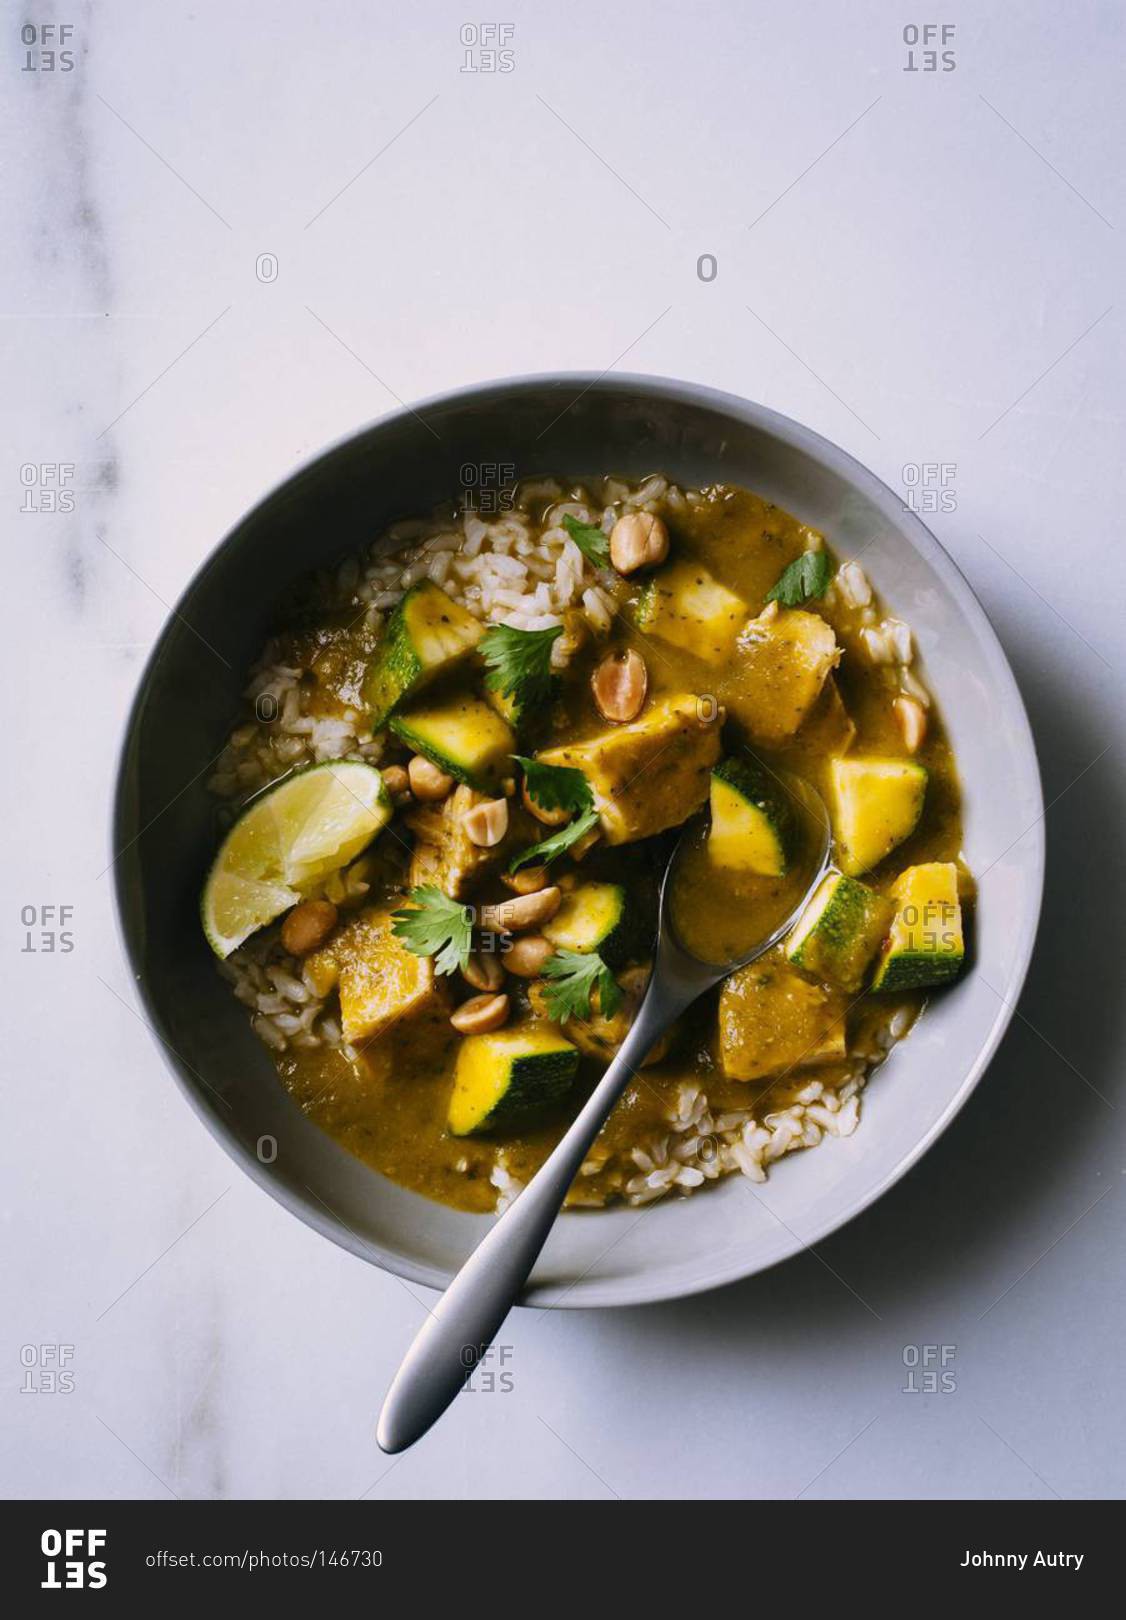 Leftover thanksgiving turkey curry with zucchini and brown rice